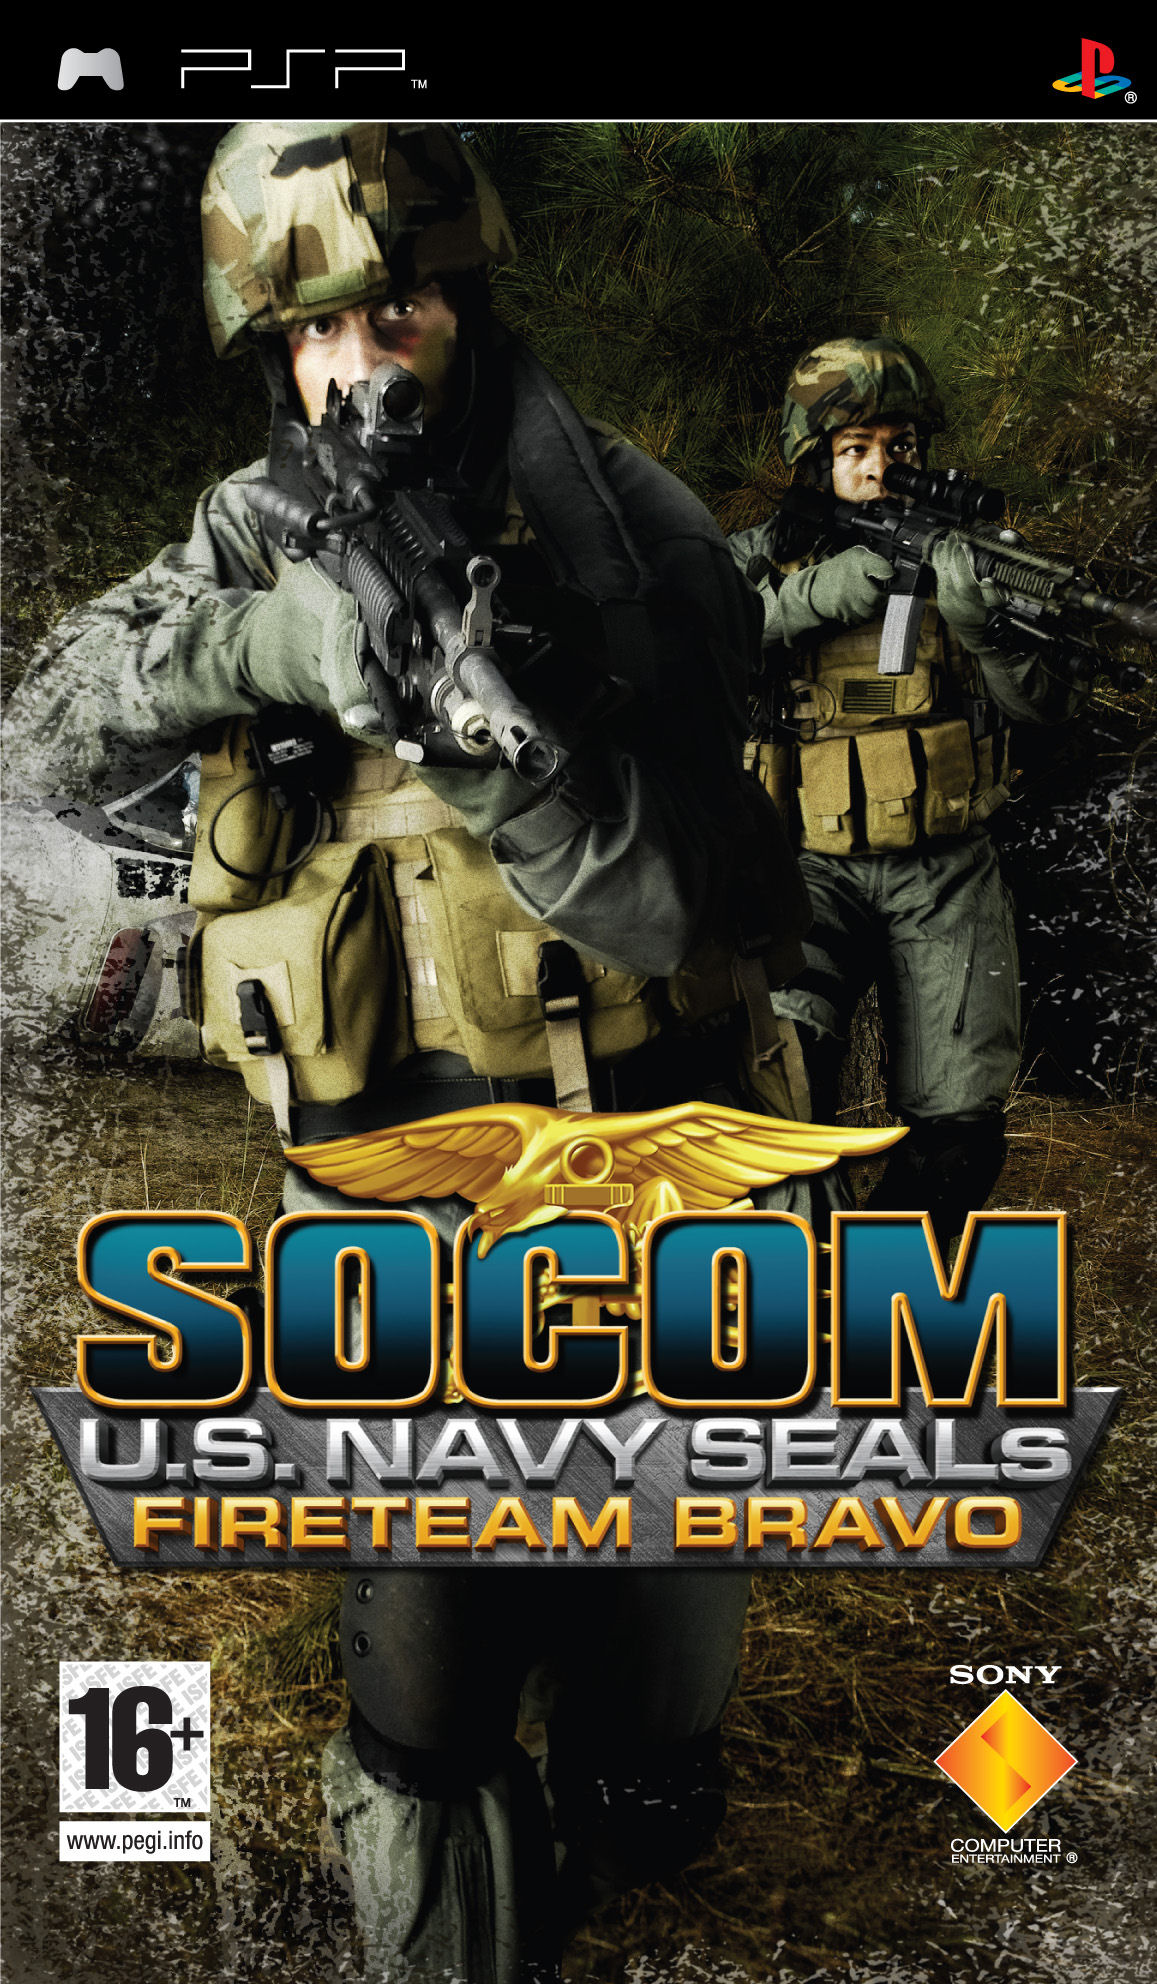 Sony looking to combat piracy with Socom: US Navy SEALs Fireteam